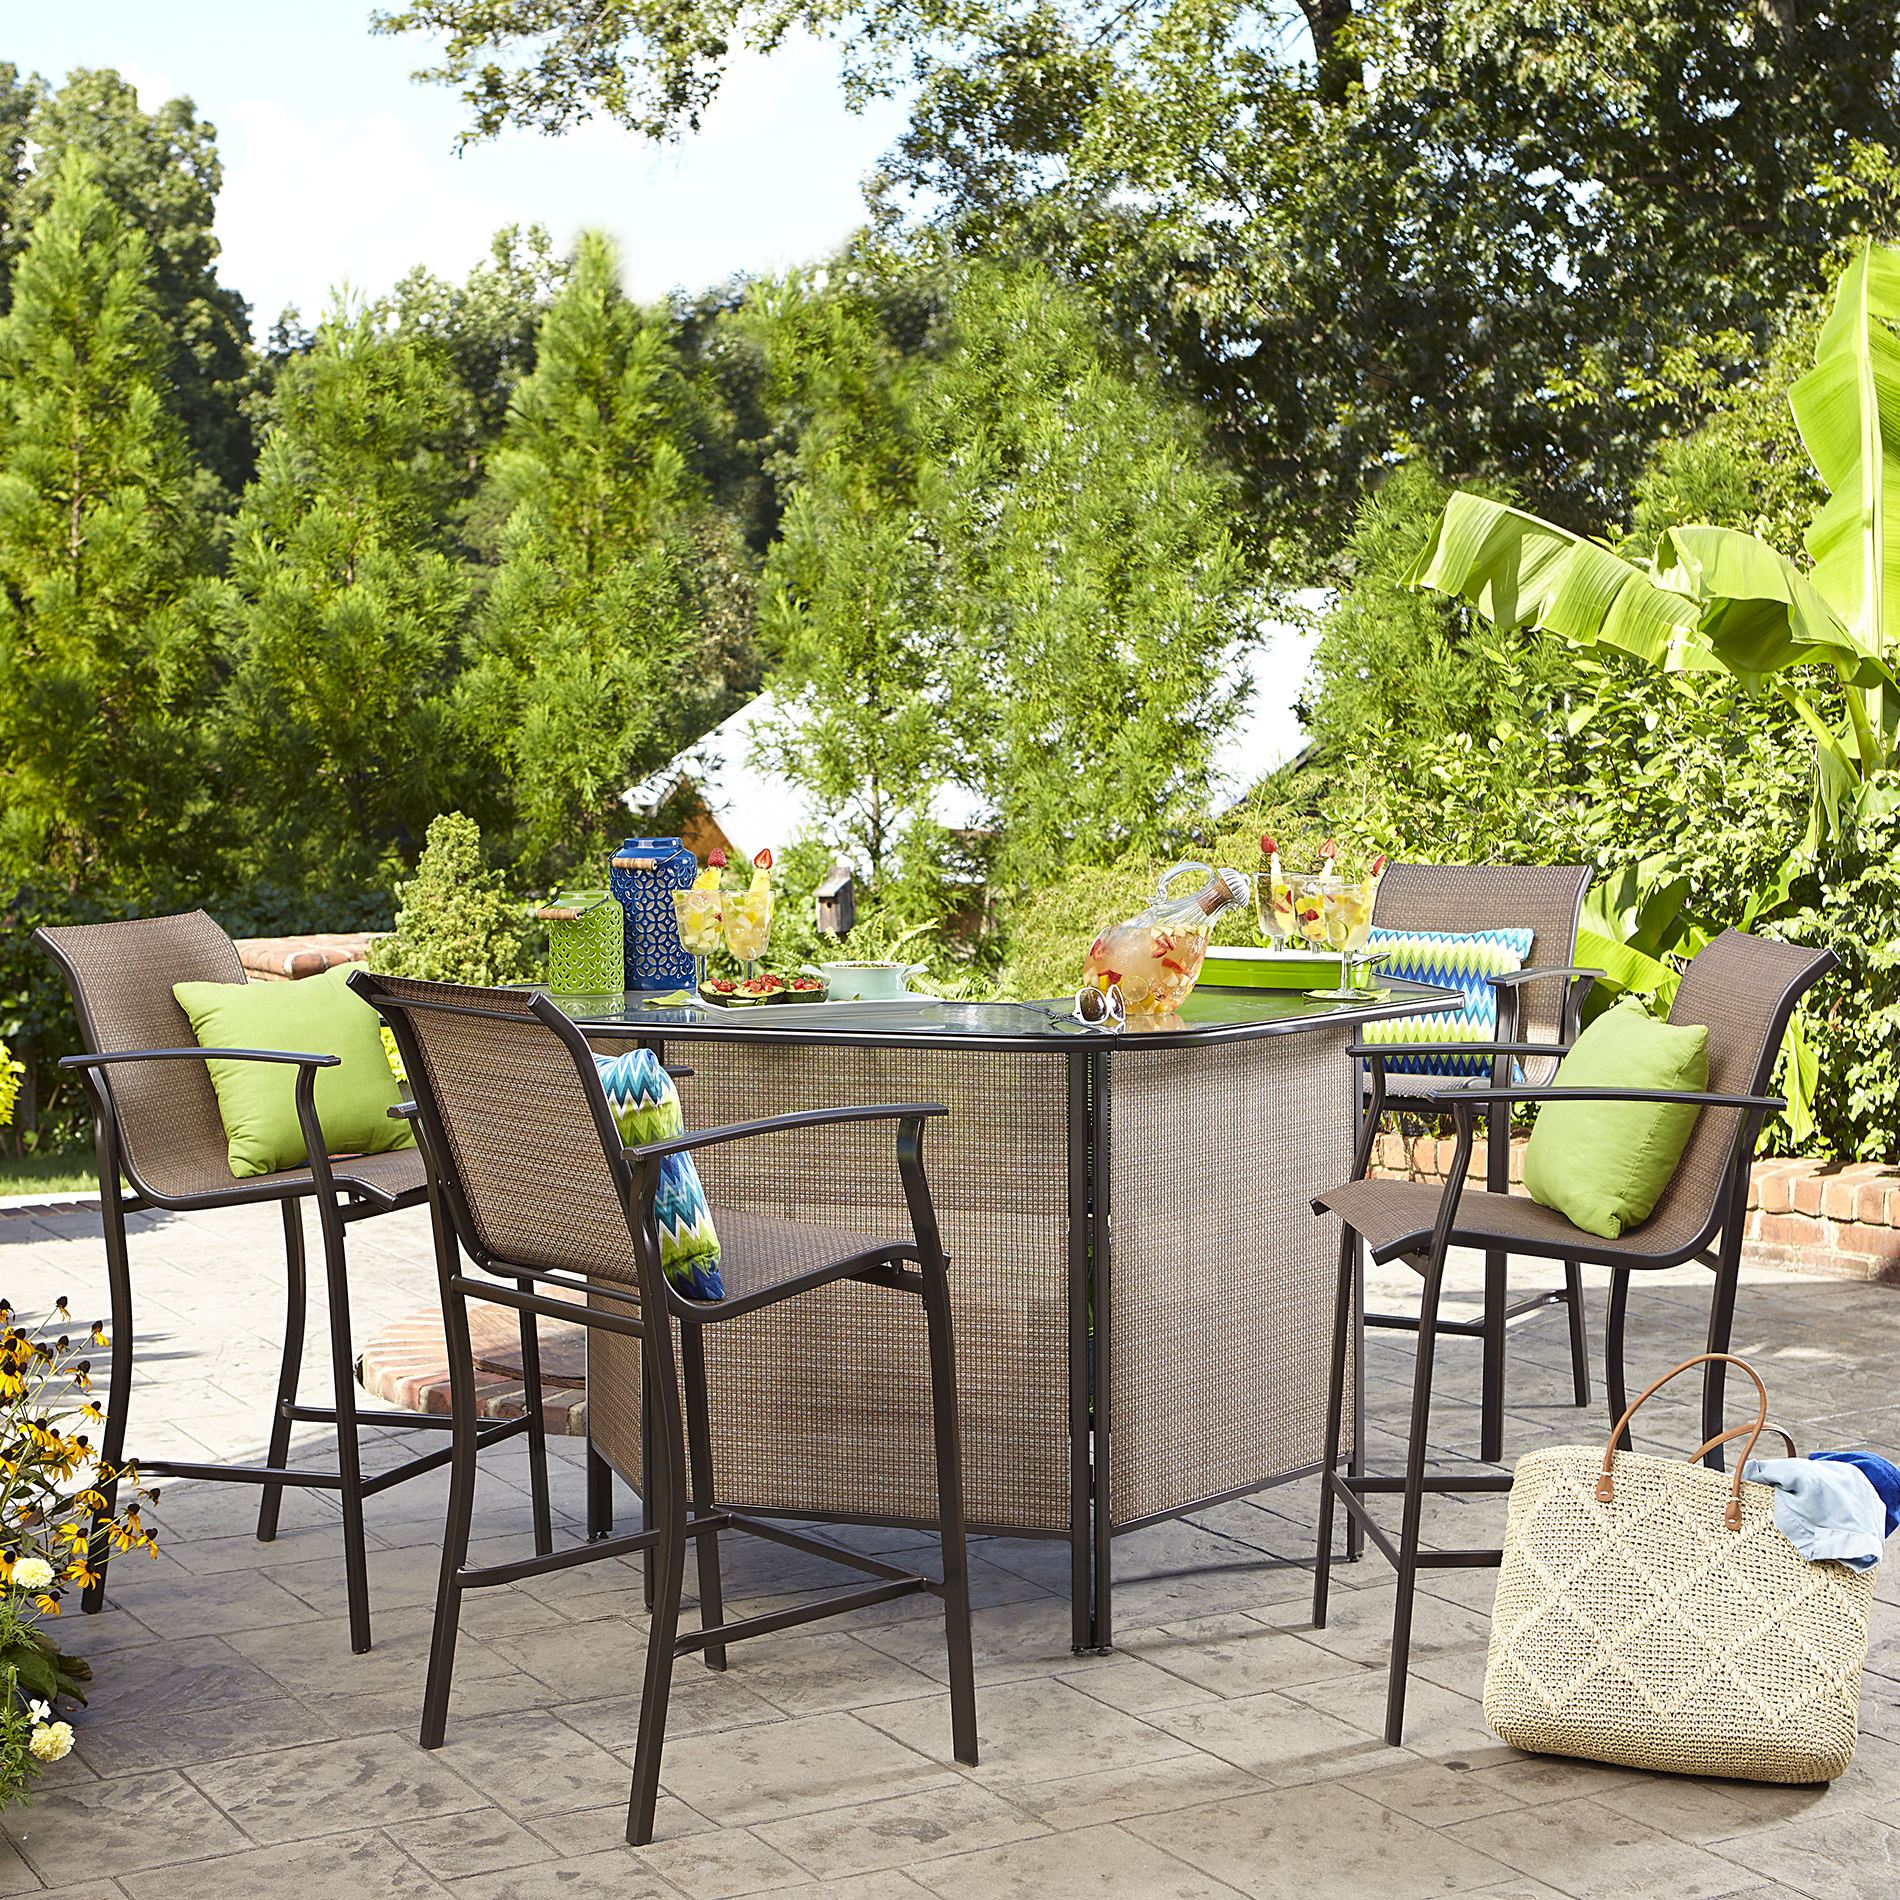 Make your perfect lawn by patio bar set